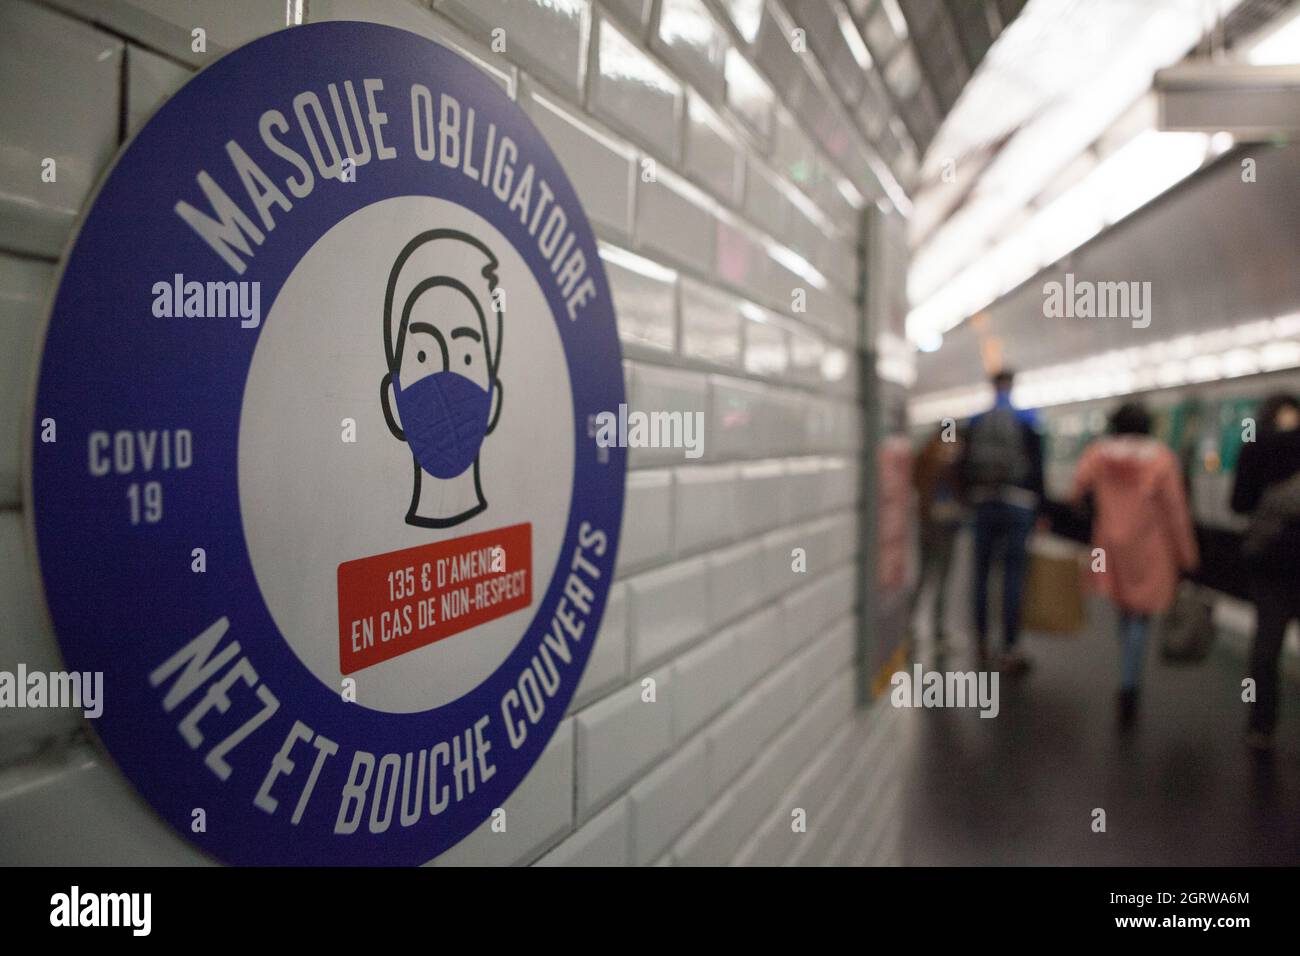 Paris, France, 1 October 2021: A notice inside a Metro station says 'Masque Obligatoire', mask obligatory over nose and mouth and warns of a 135 euro fine for non-compliance. Almost everyone wears face masks, as required, to help reduce the spread of coronavirus and the risk of covid-19. Anna Watson/Alamy Live News Stock Photo